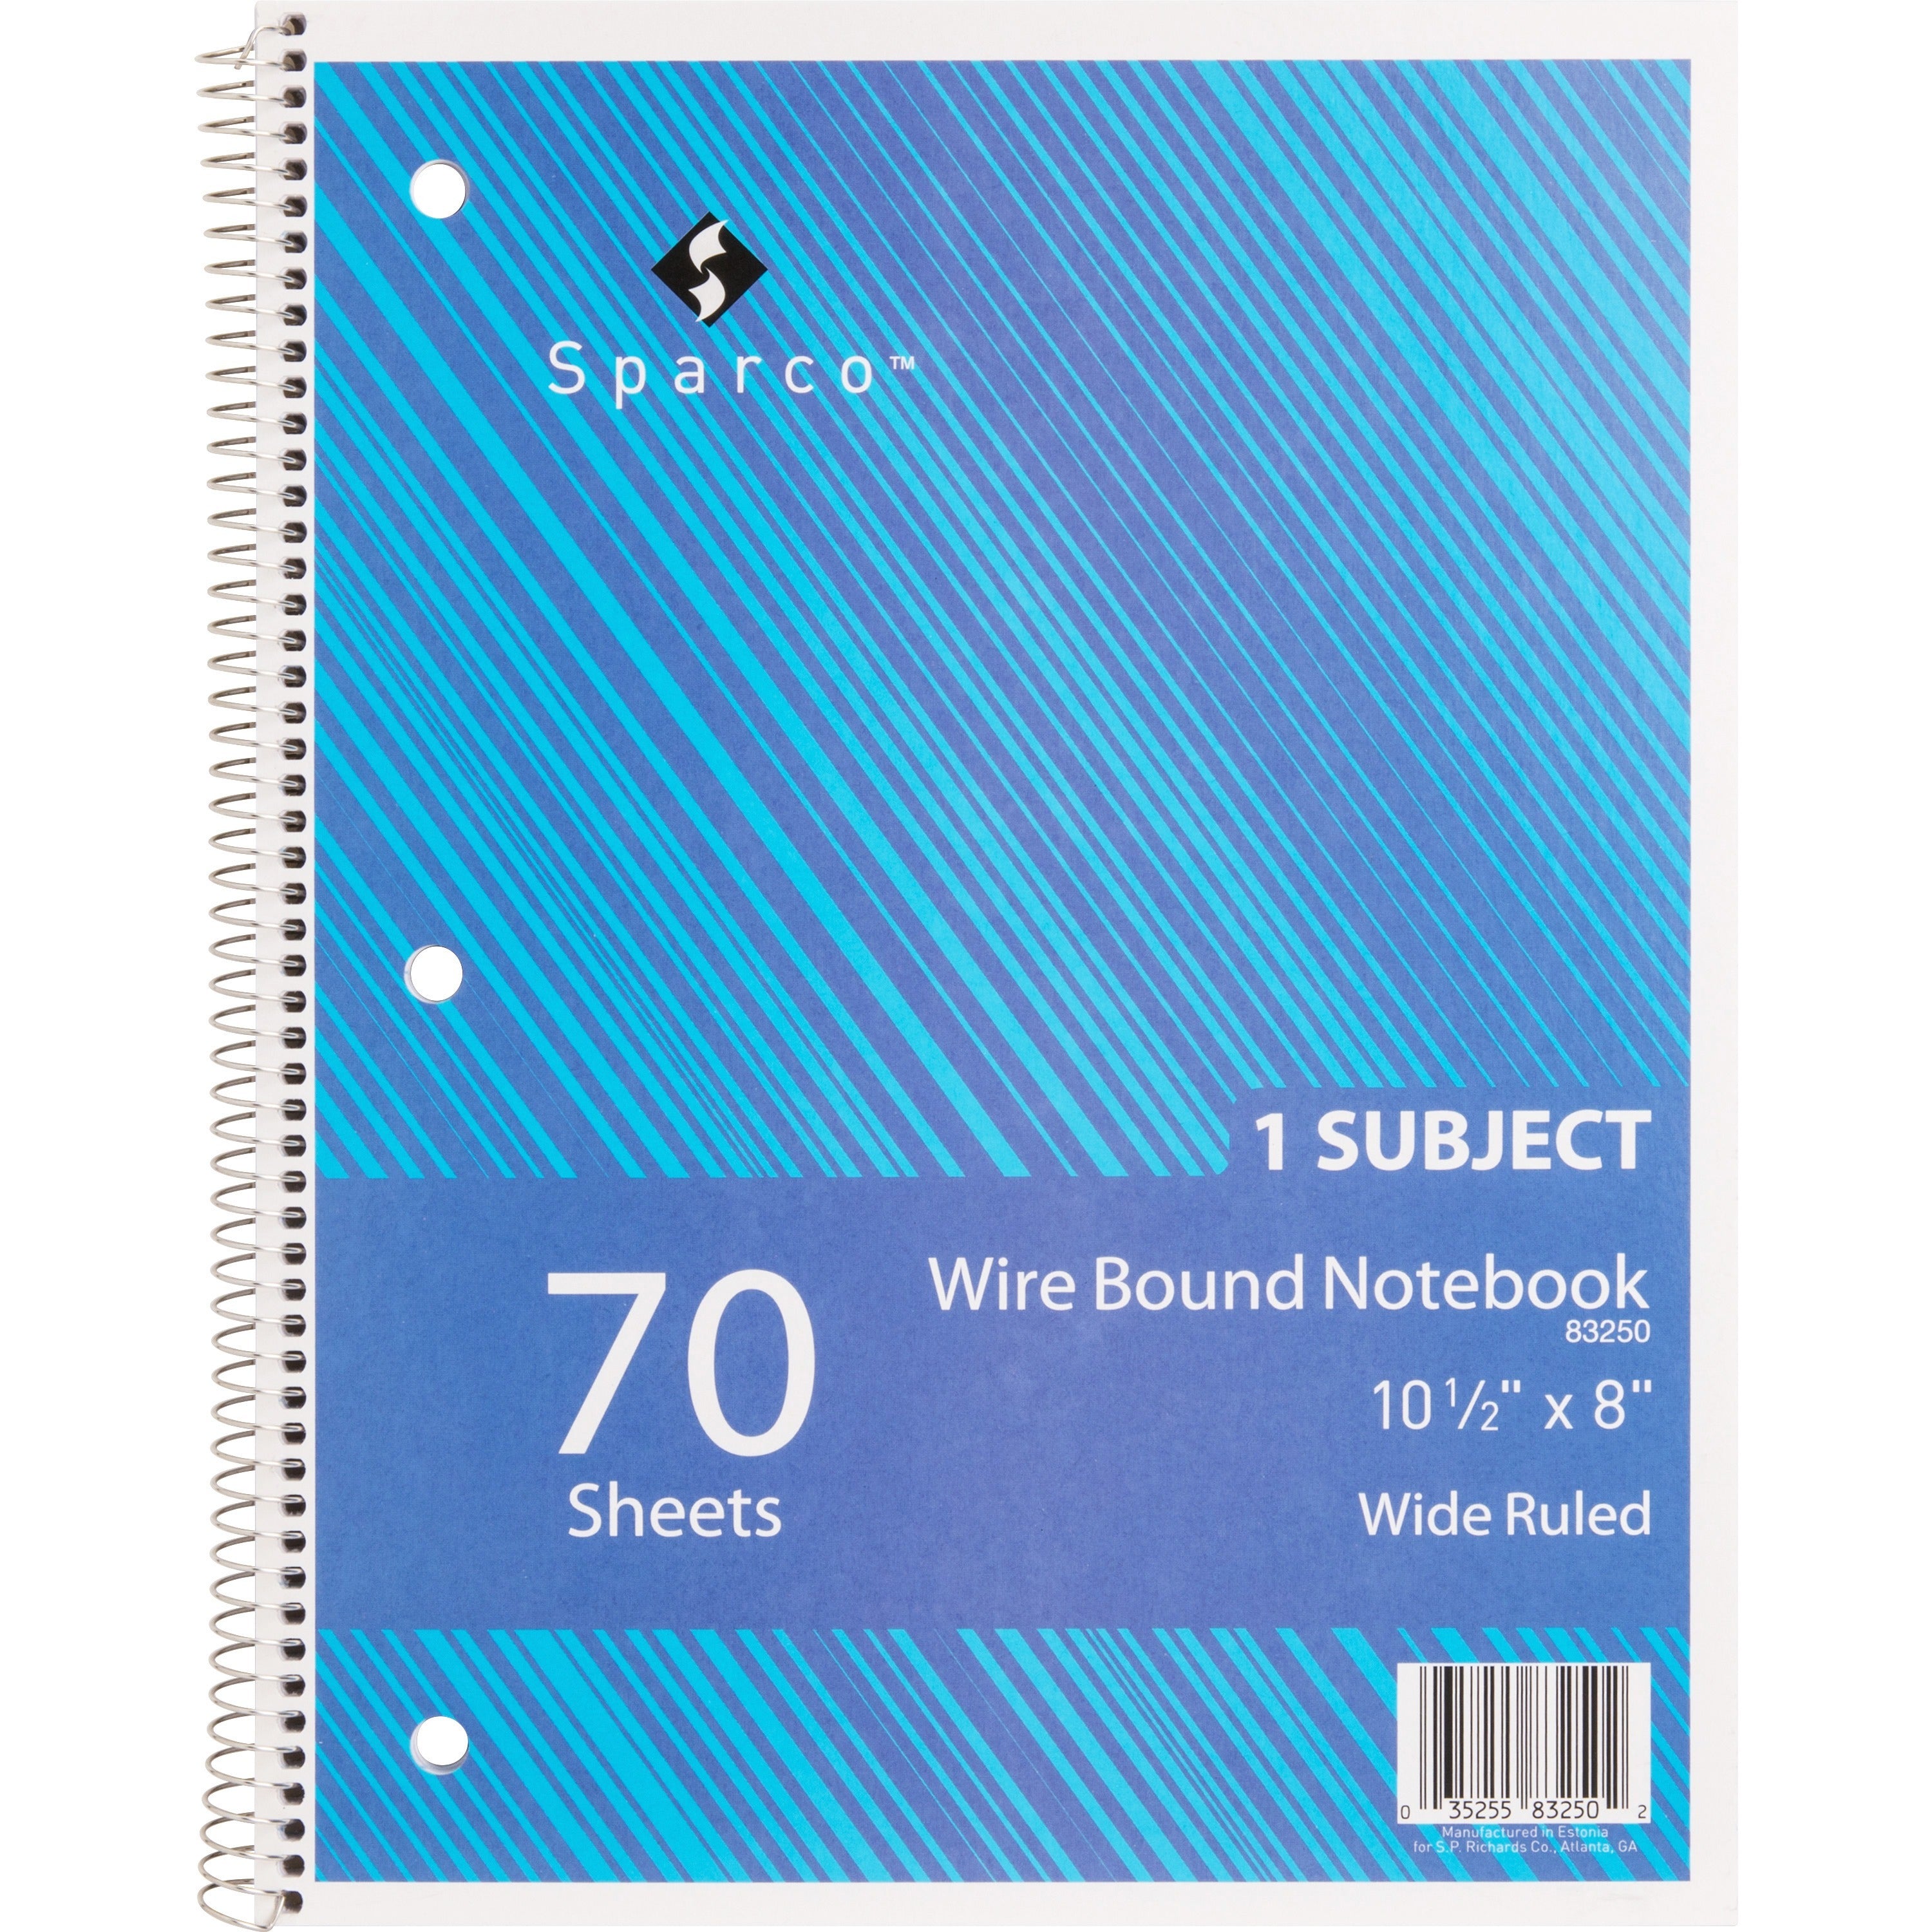 Sparco Quality 3HP Notebook - 1 Subject(s) - 70 Sheets - Wire Bound - Wide Ruled - Unruled Margin - 16 lb Basis Weight - 8" x 10 1/2" - Bright White Paper - AssortedChipboard Cover - Bleed Resistant, Stiff-cover - 1 Each - 